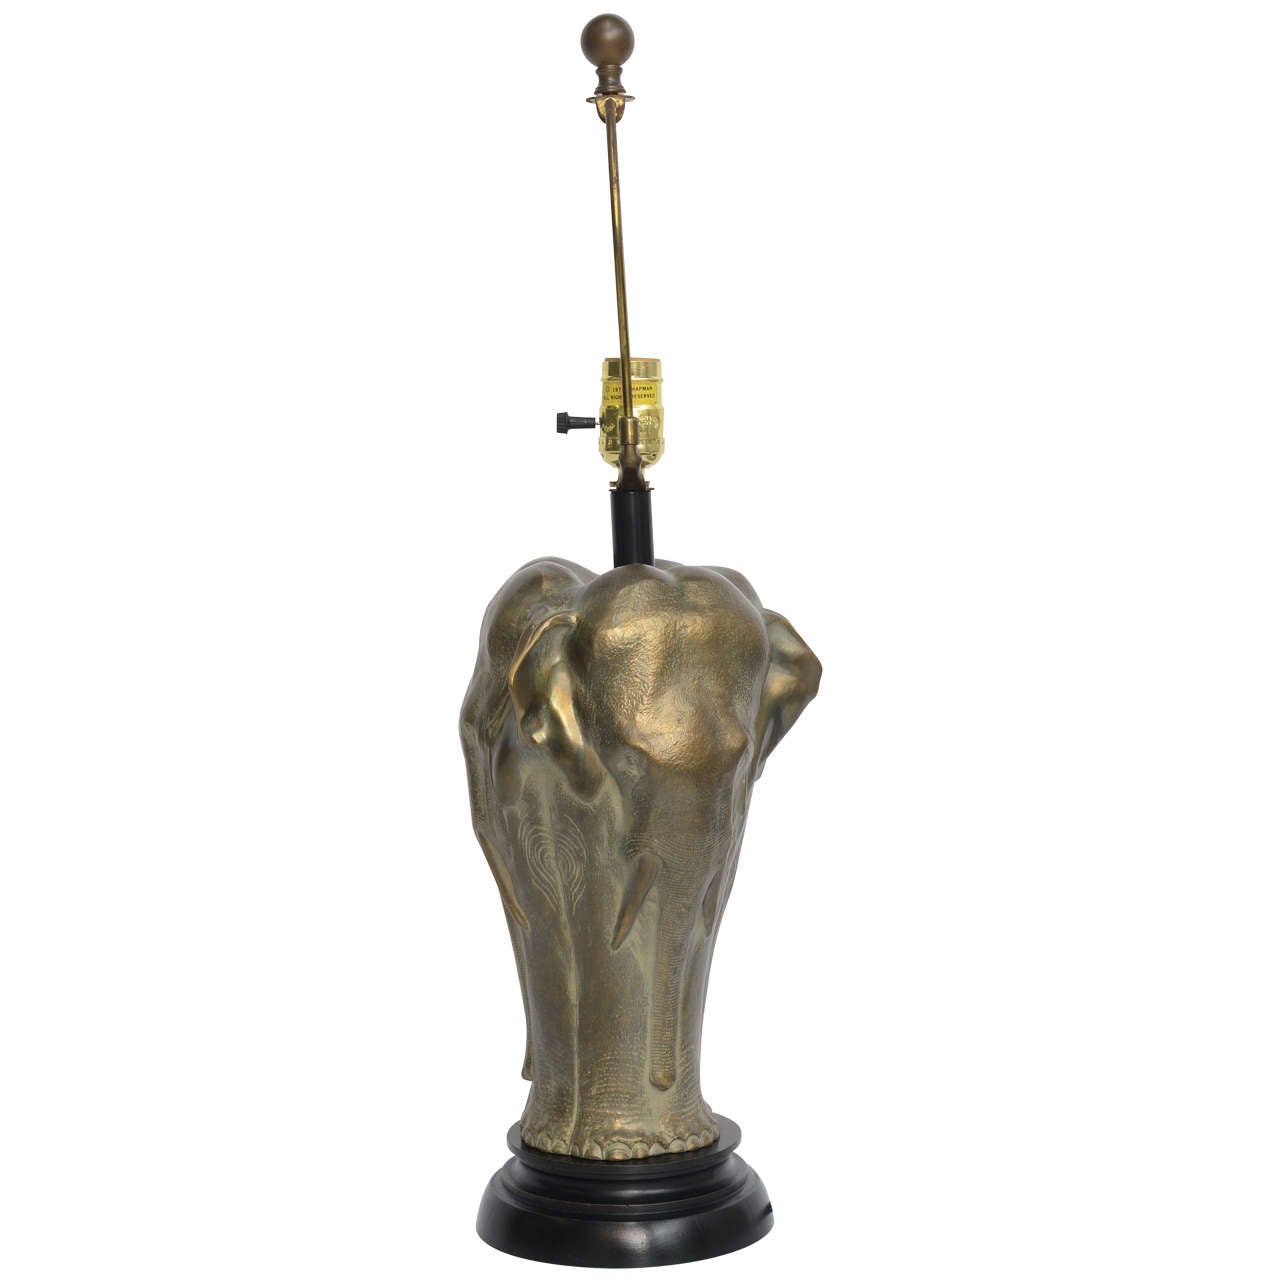 ...SOLD...Wonderful table lamp depicting three elephant's shoulder to shoulder equidistant around the lamp in sculptural bronze. Ebonized wood socle base. Retains original harp and finial. Rewired and with new UL three level socket interior,